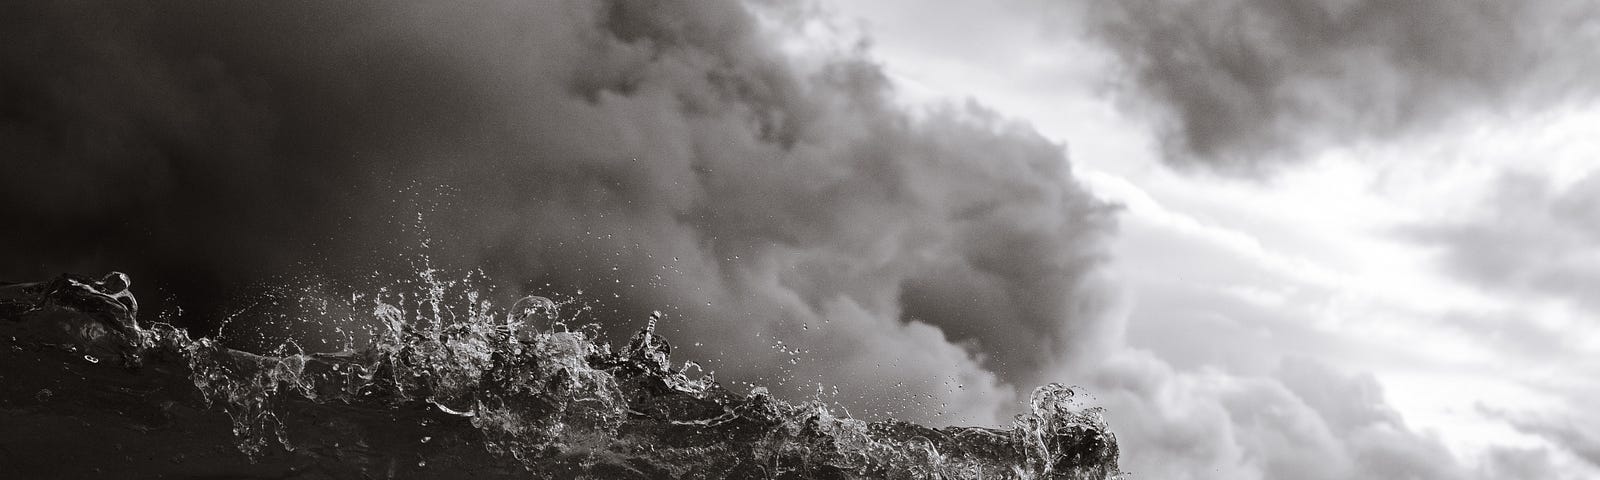 A grayscale photograph of a storm-tossed sea